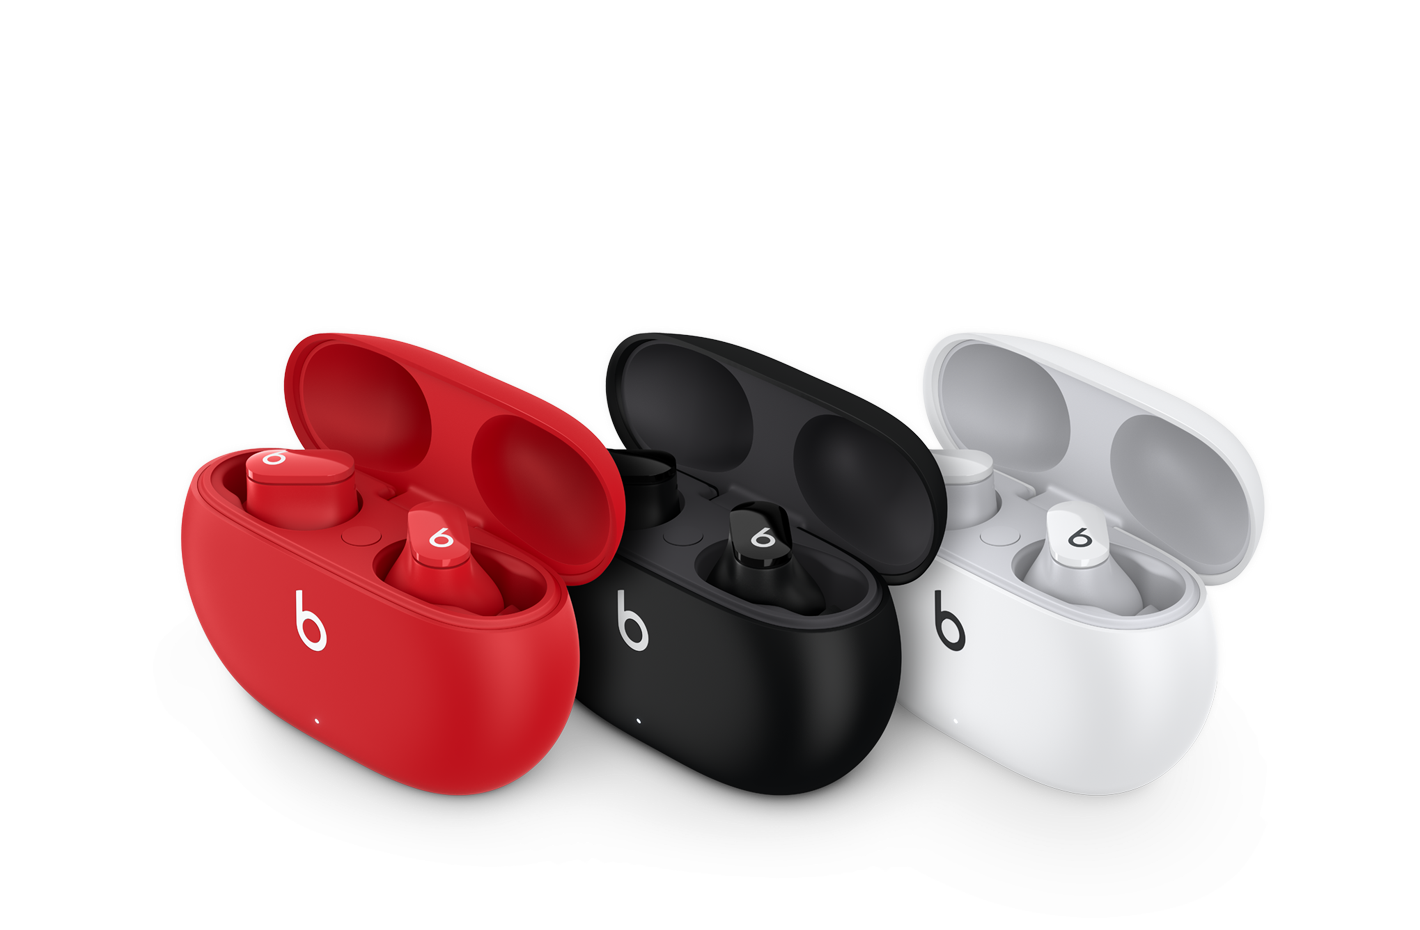 Apple (Finally) Launches Highly-Speculated Beats Studio Buds At $150